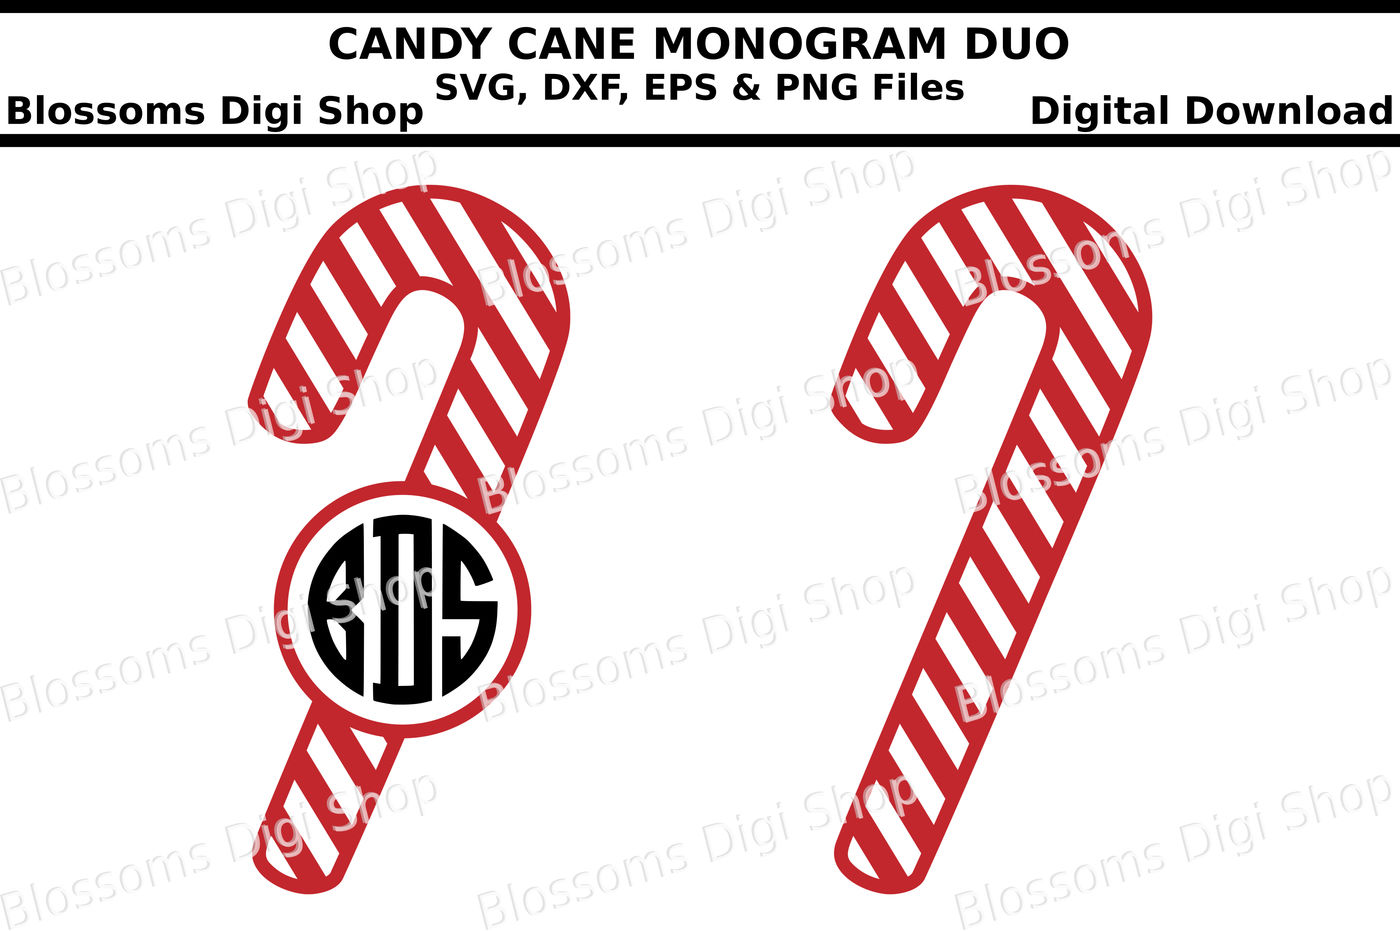 Candy Cane Monogram Duo Svg Eps Dxf And Png Cut Files By Blossoms Digi Shop Thehungryjpeg Com